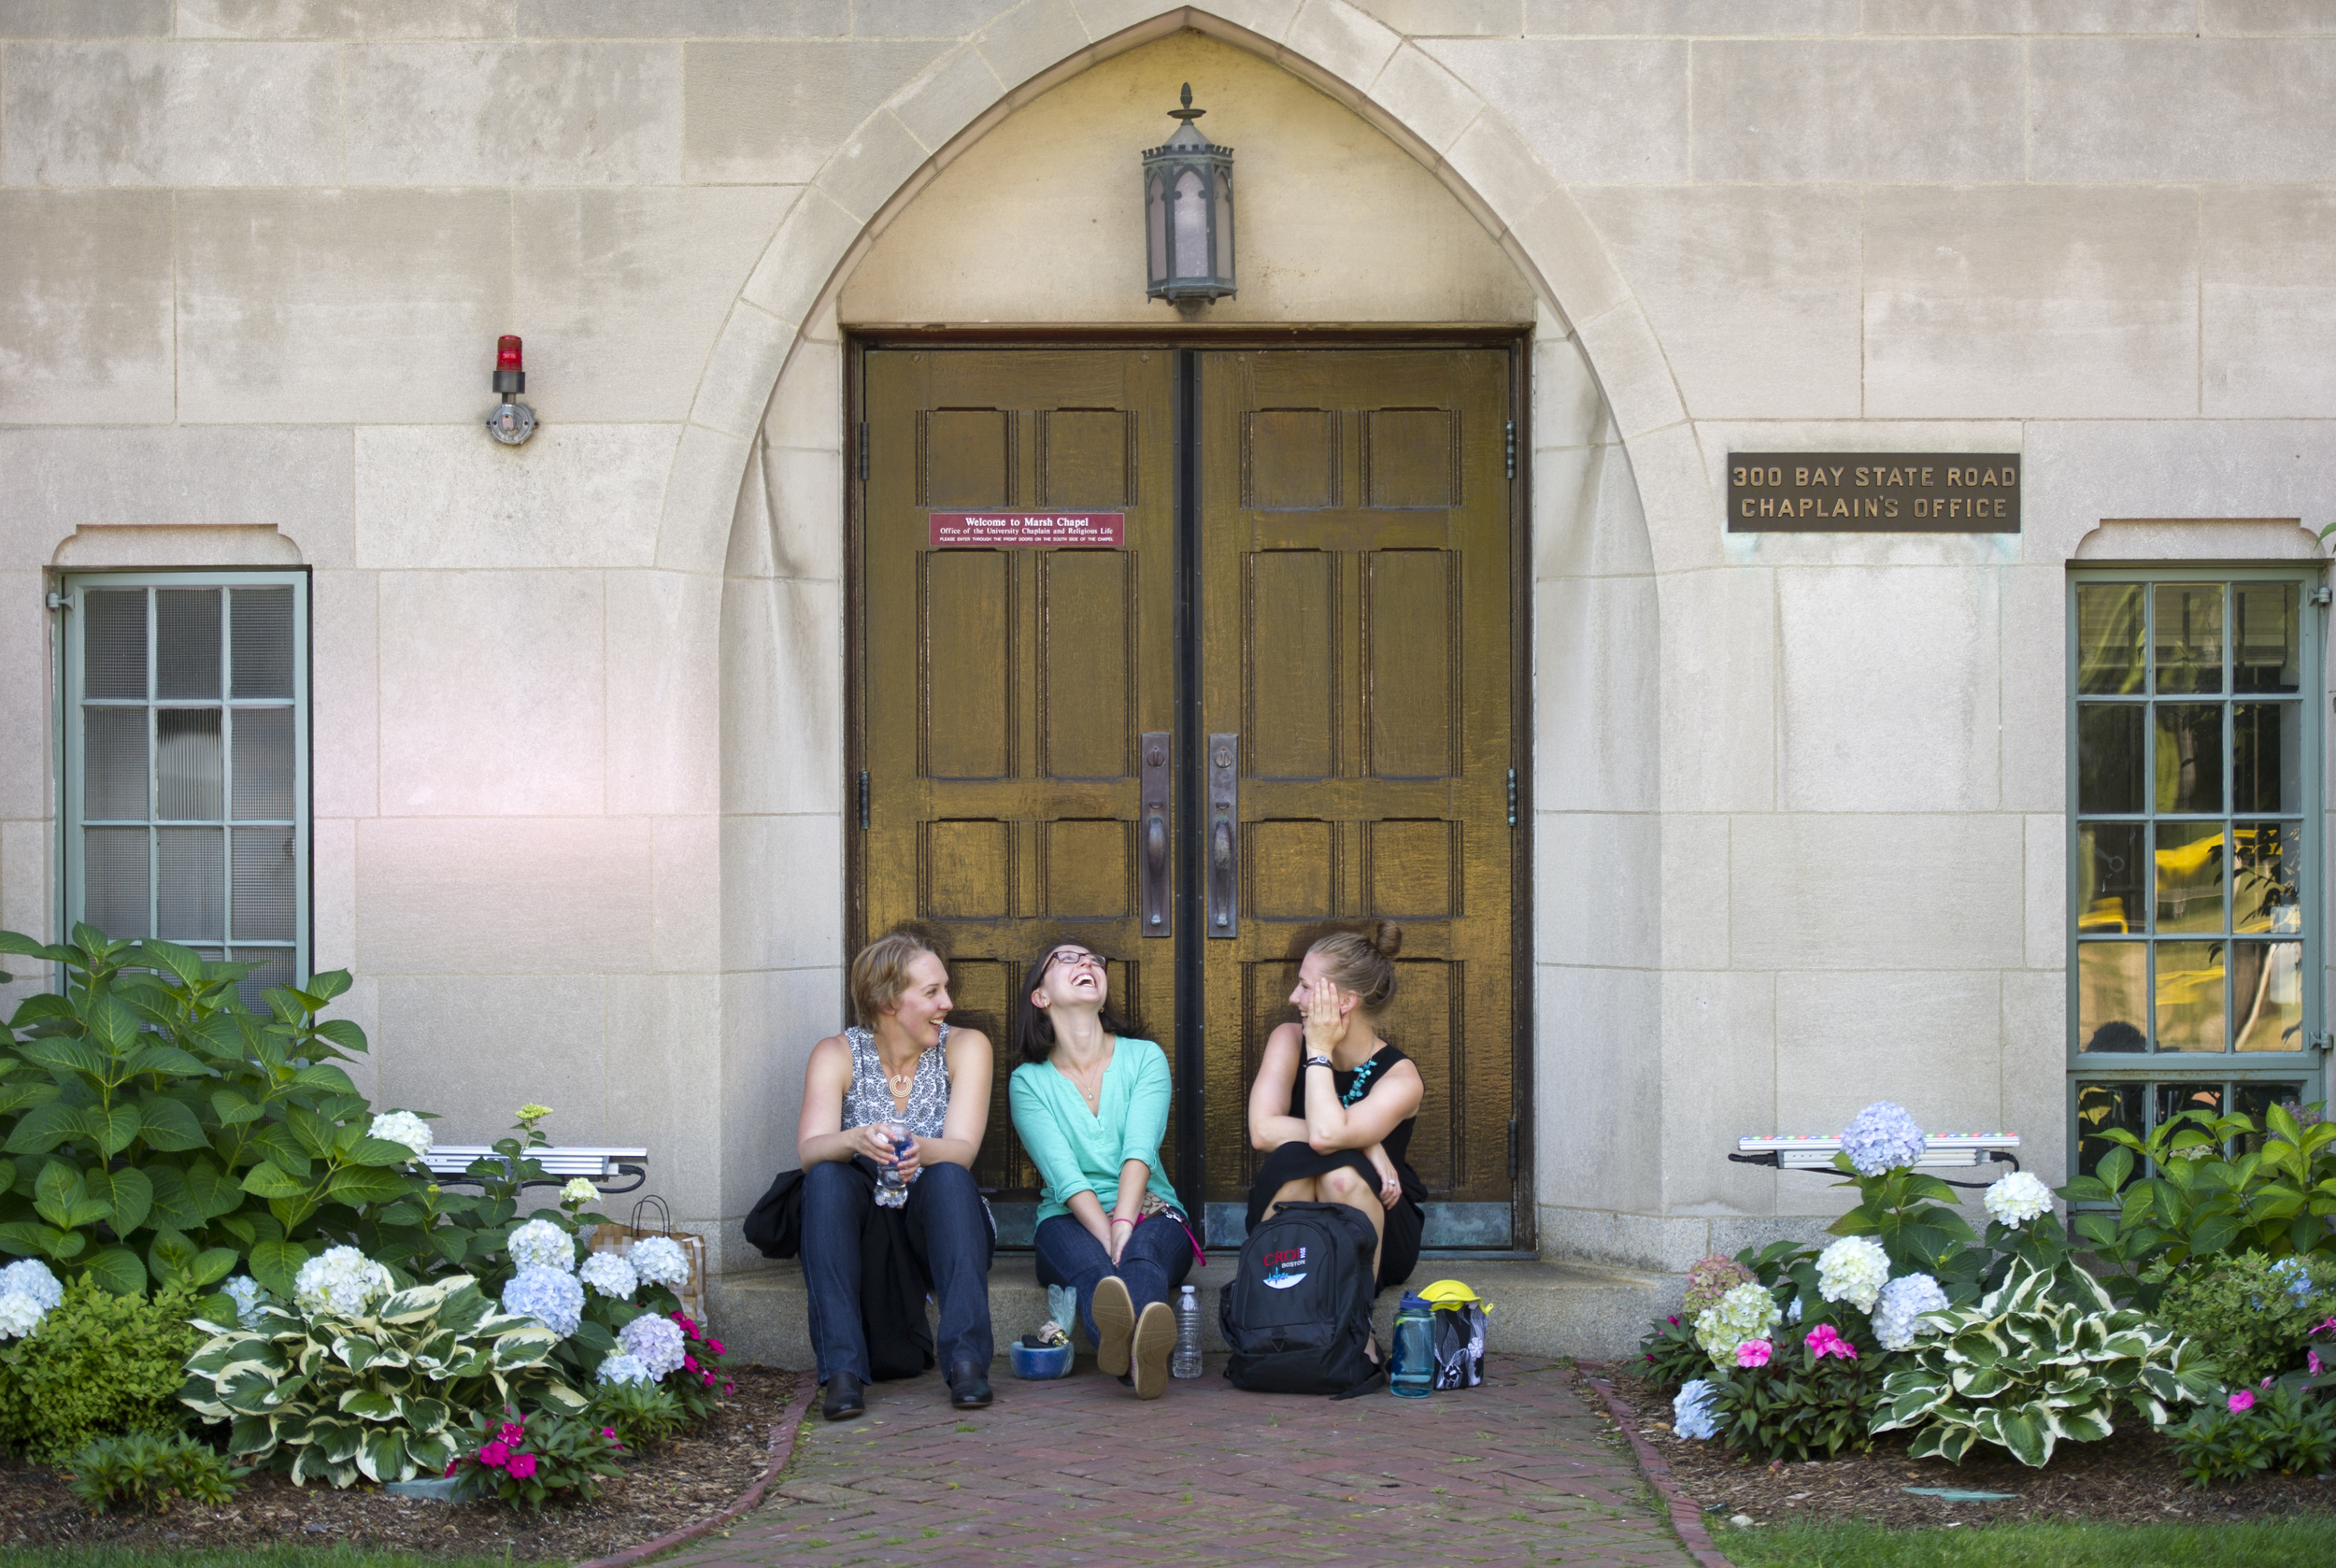  Debbie Hinck (LAW'17) from left, Yelena Kuznetsov (LAW'17), and Hillary Chadwick (LAW'17) get to to know each other during a break between classes September 4, 2014. The three had met briefly for the first time back in the spring during an orientati